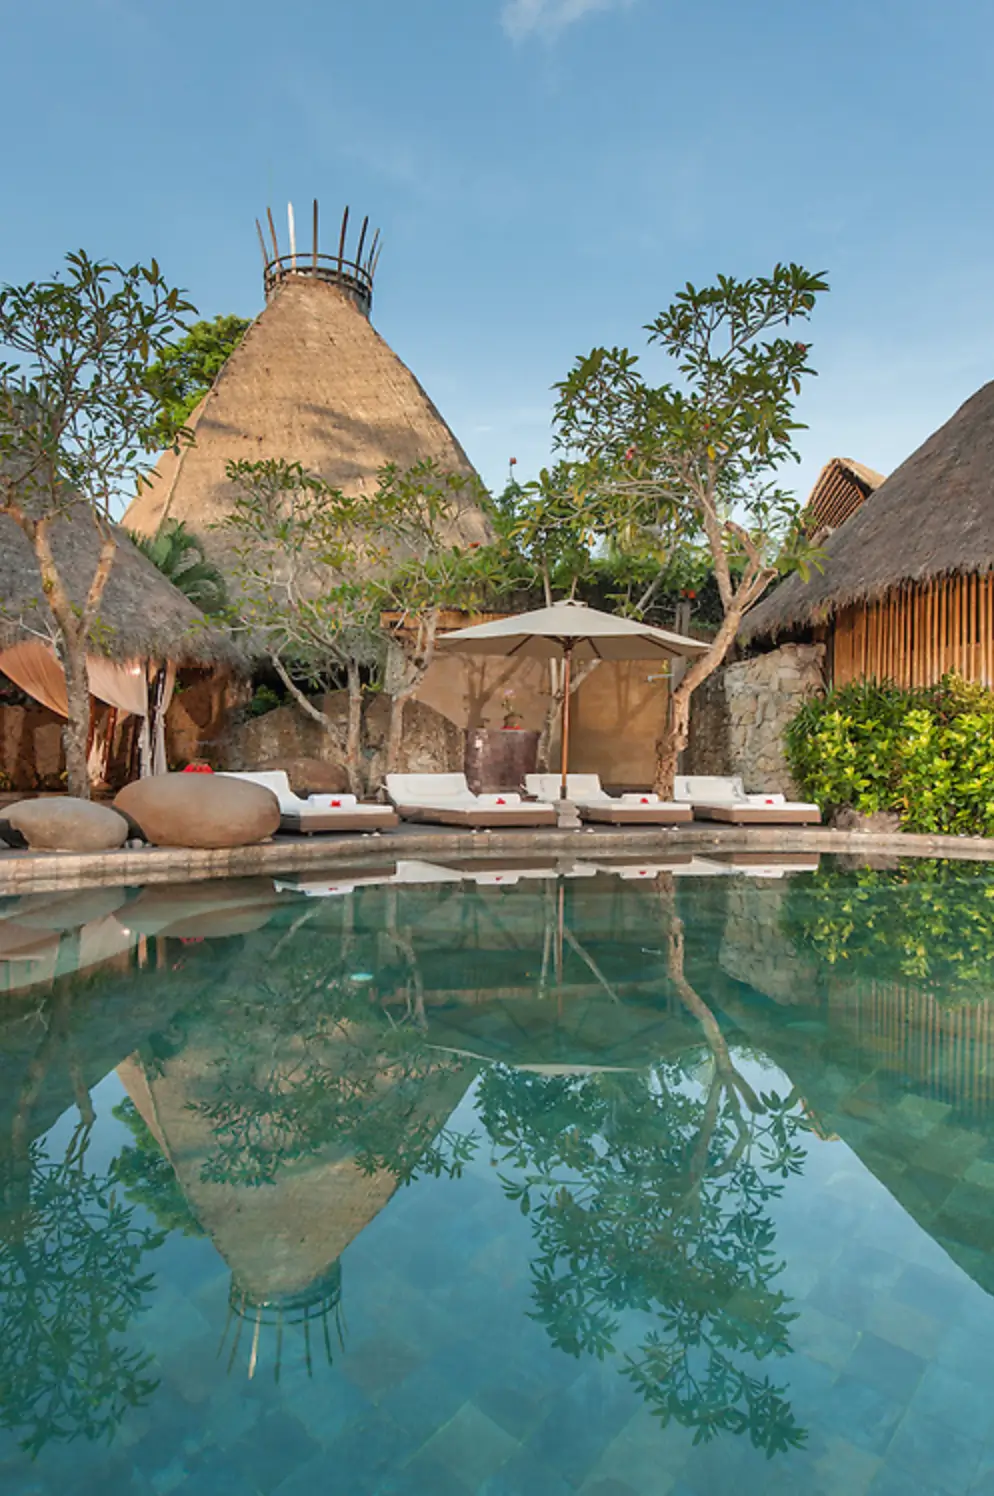 A tranquil pool area at Fivelements Retreat in Bali, featuring unique thatched-roof structures and comfortable lounging areas.